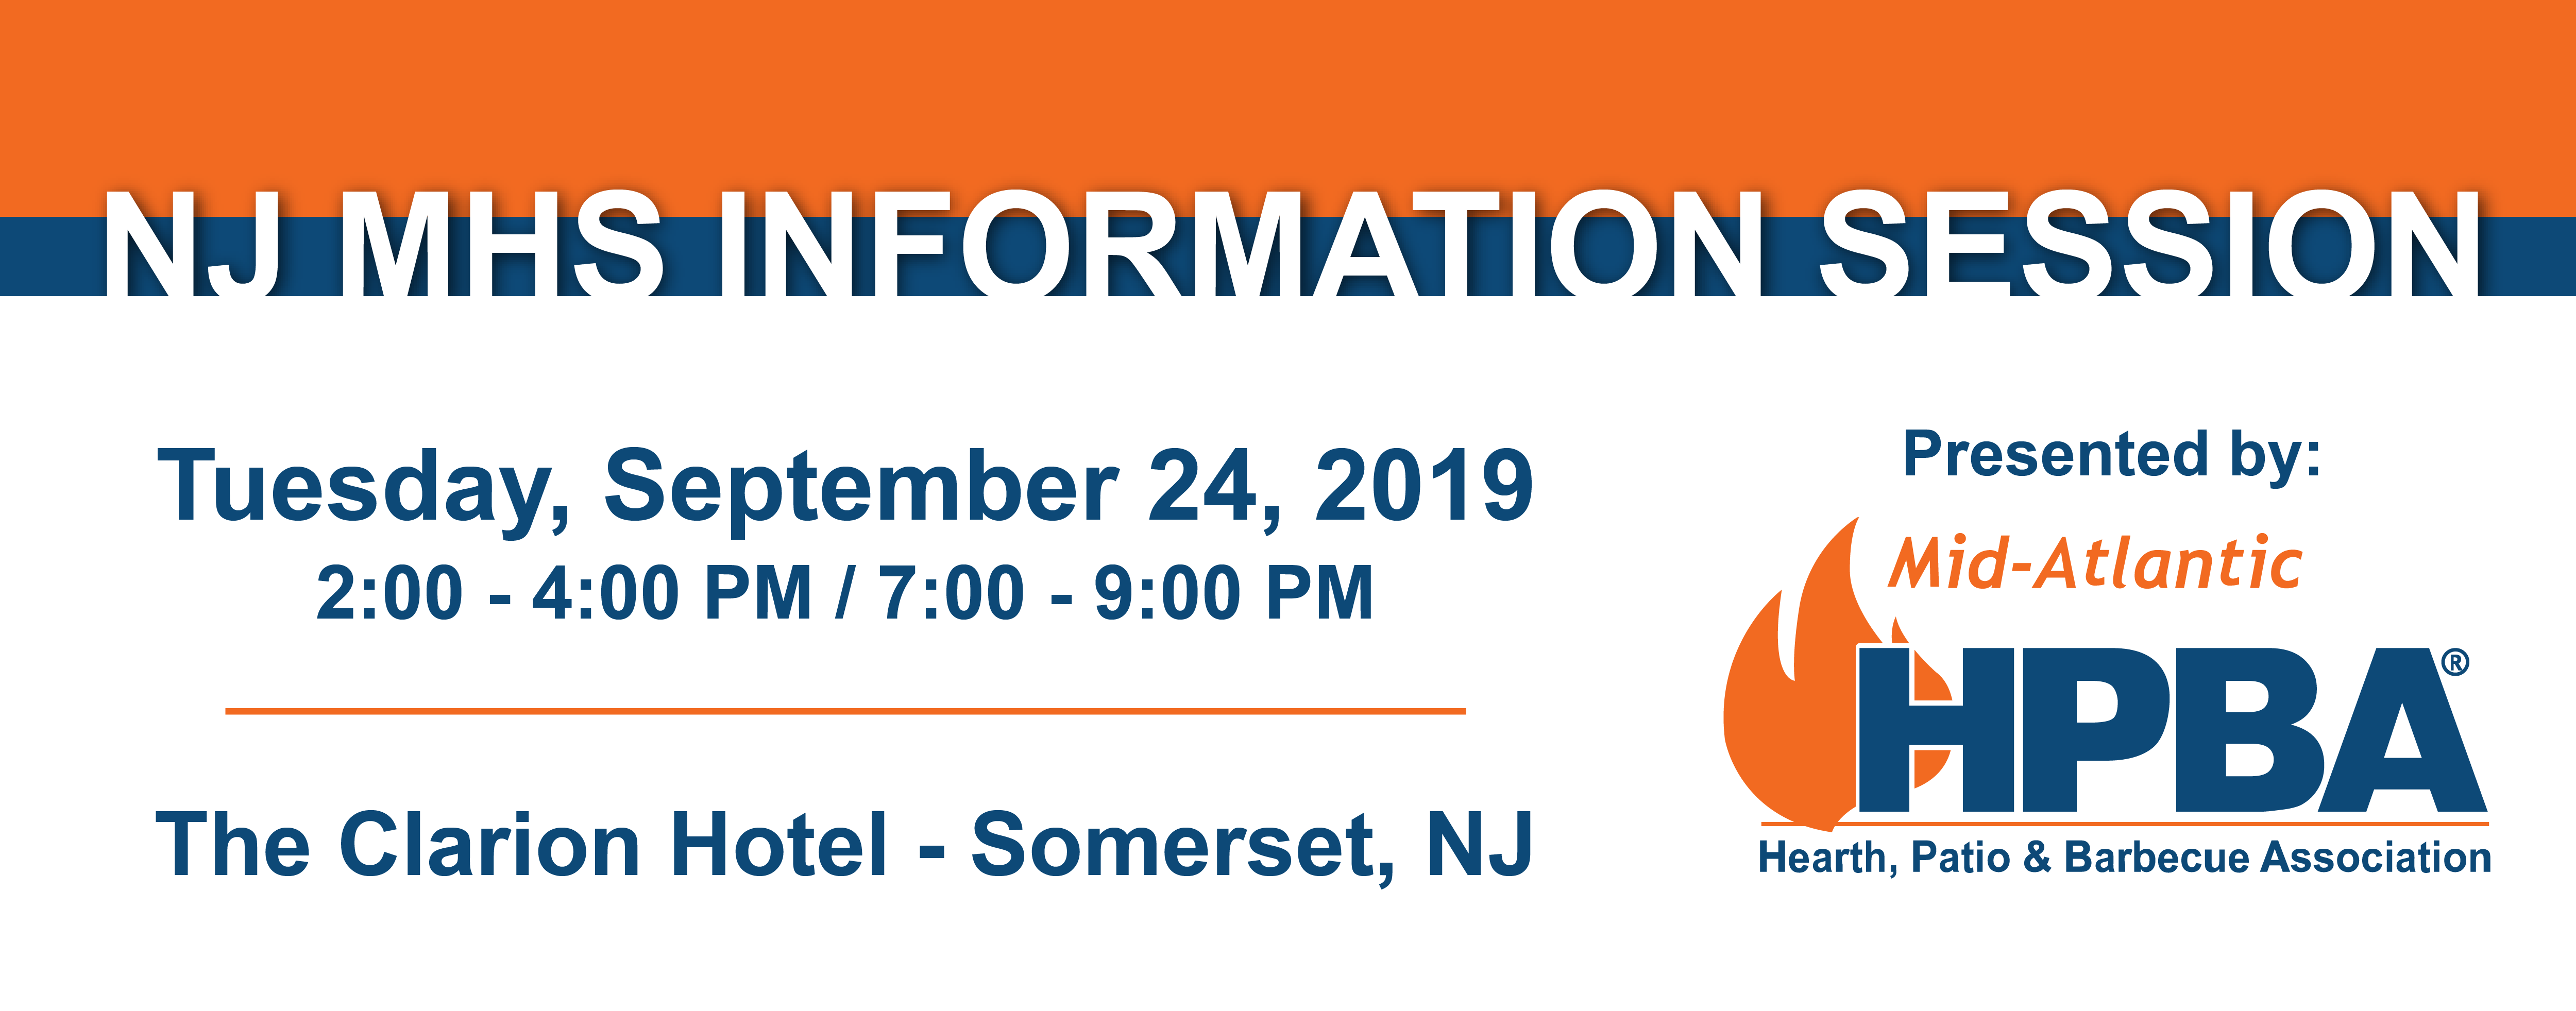 New Jersey FREE MHS Information Sessions,
                        September 24 - September 24, 2019
                        , Clarion Hotel
                        Somerset
                        New Jersey